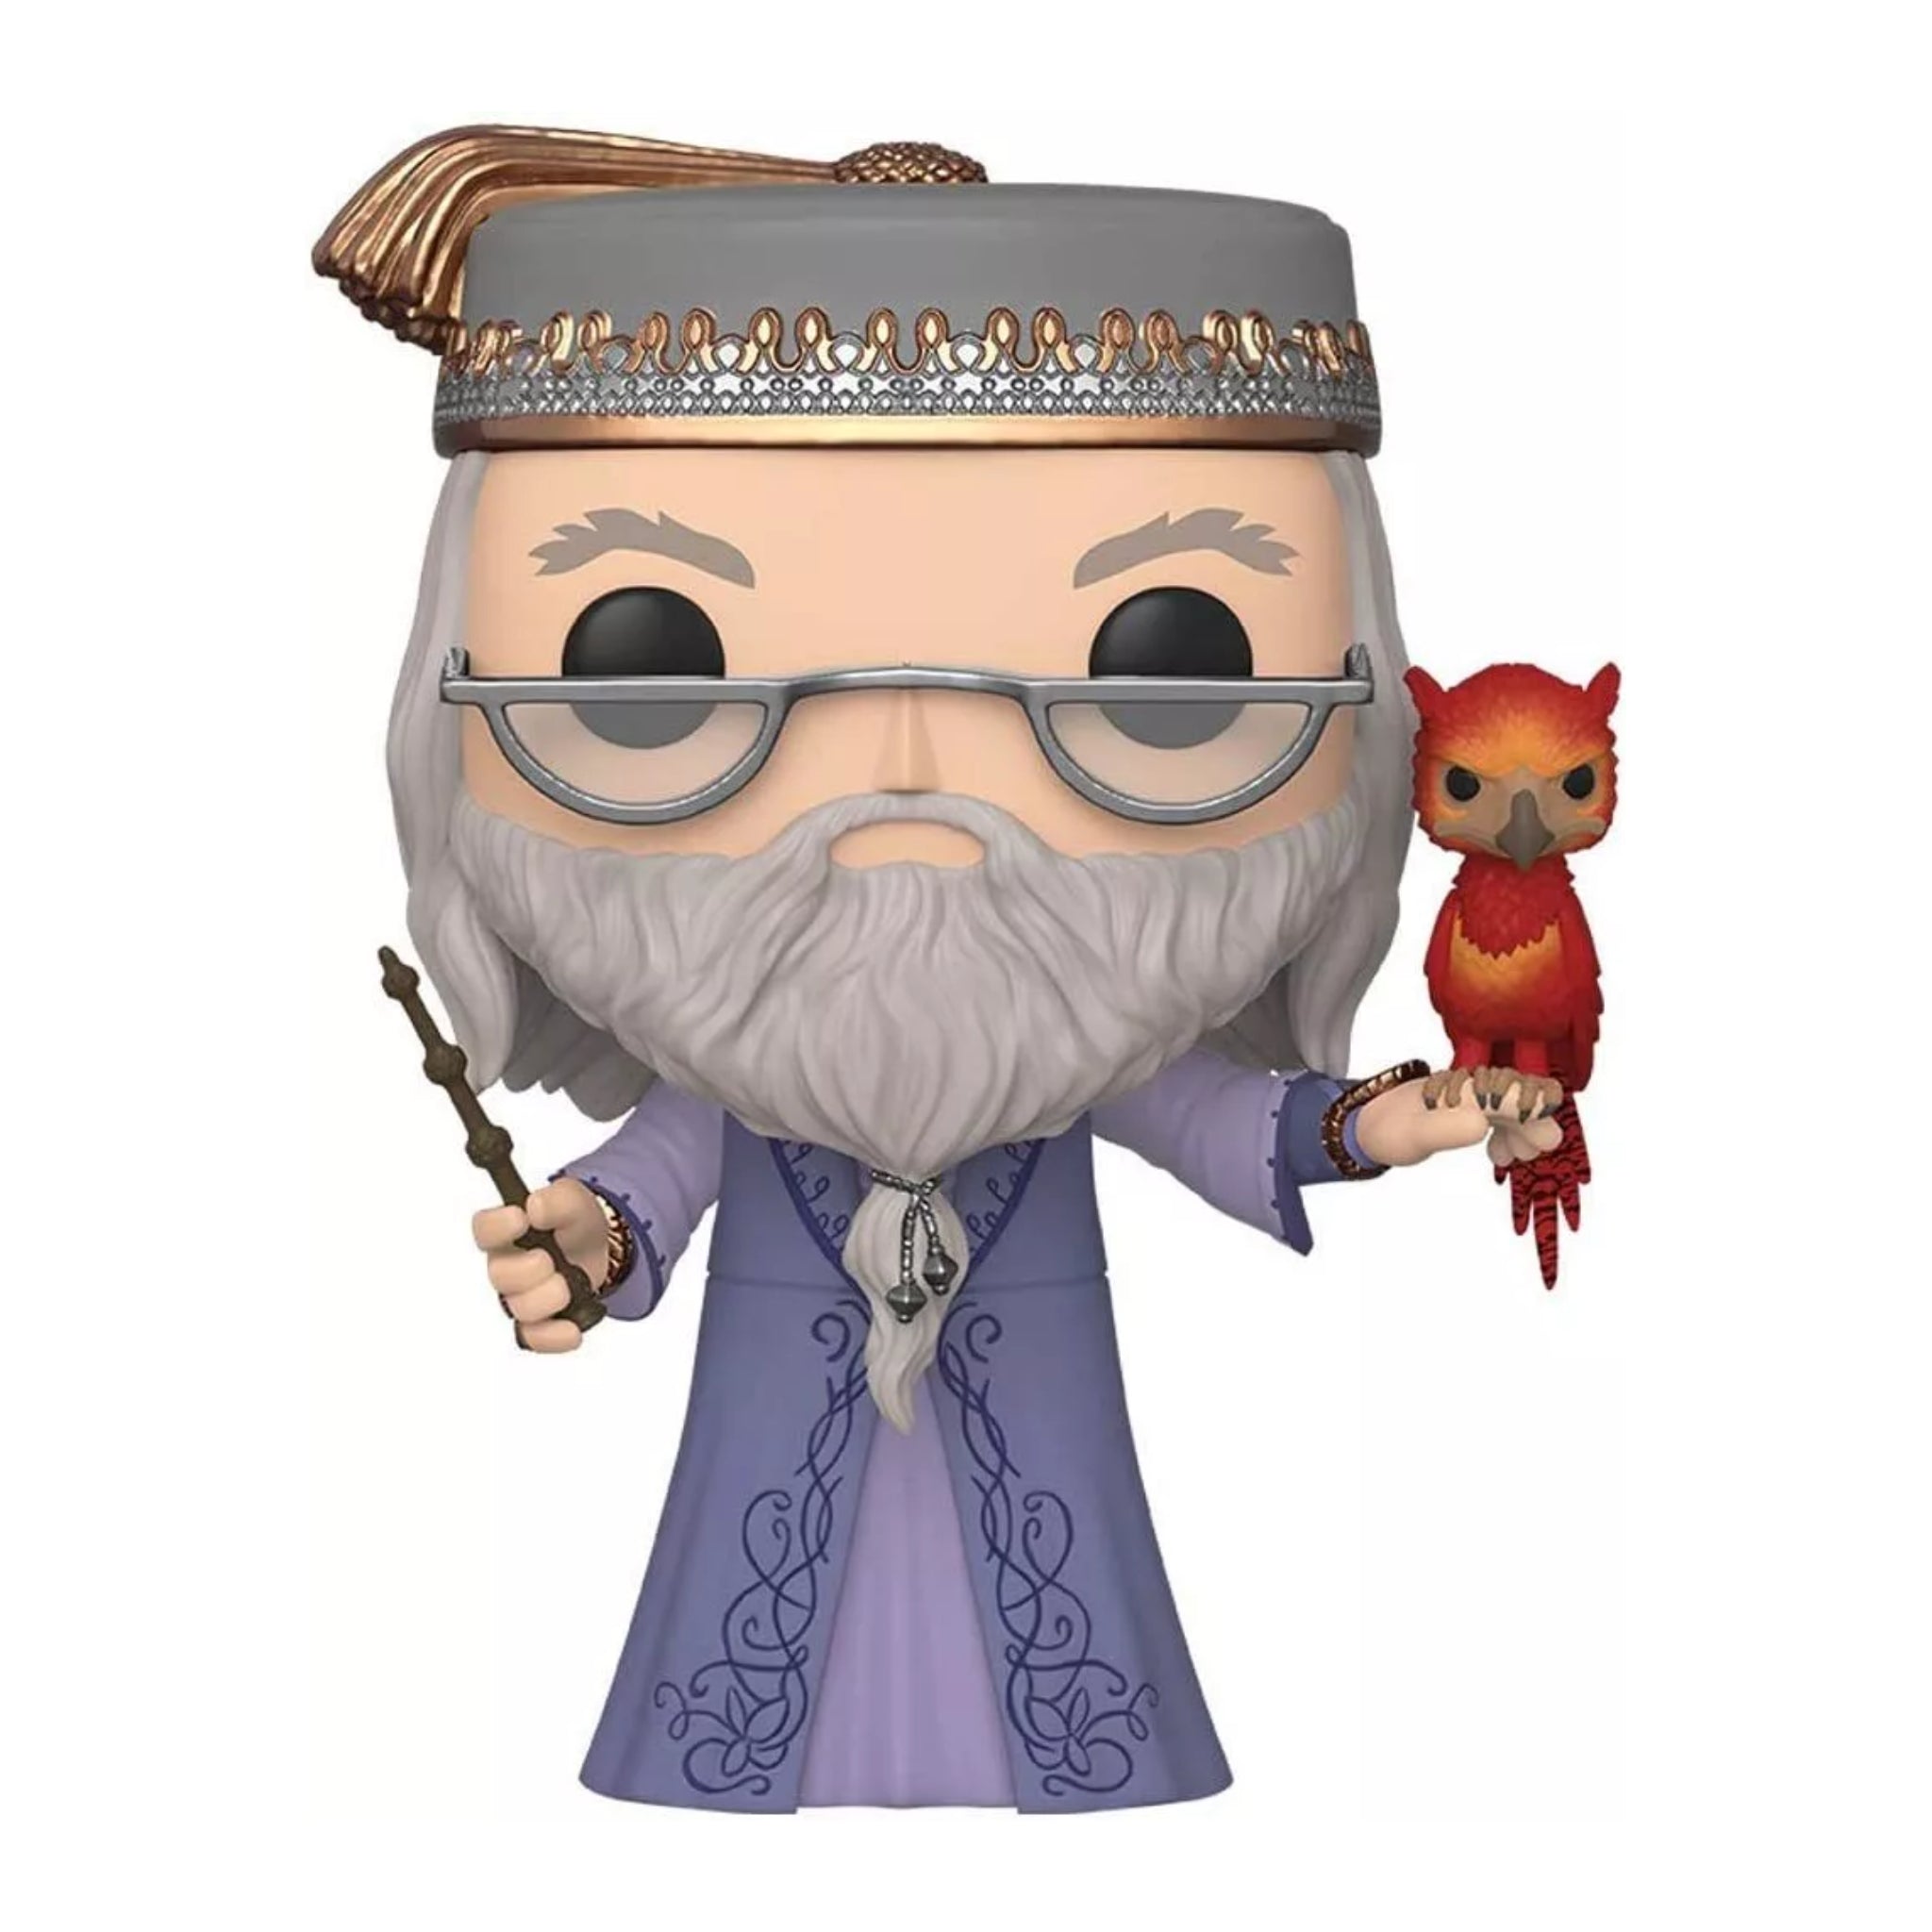 Albus Dumbledore with Fawkes 10 INCH Funko Pop!